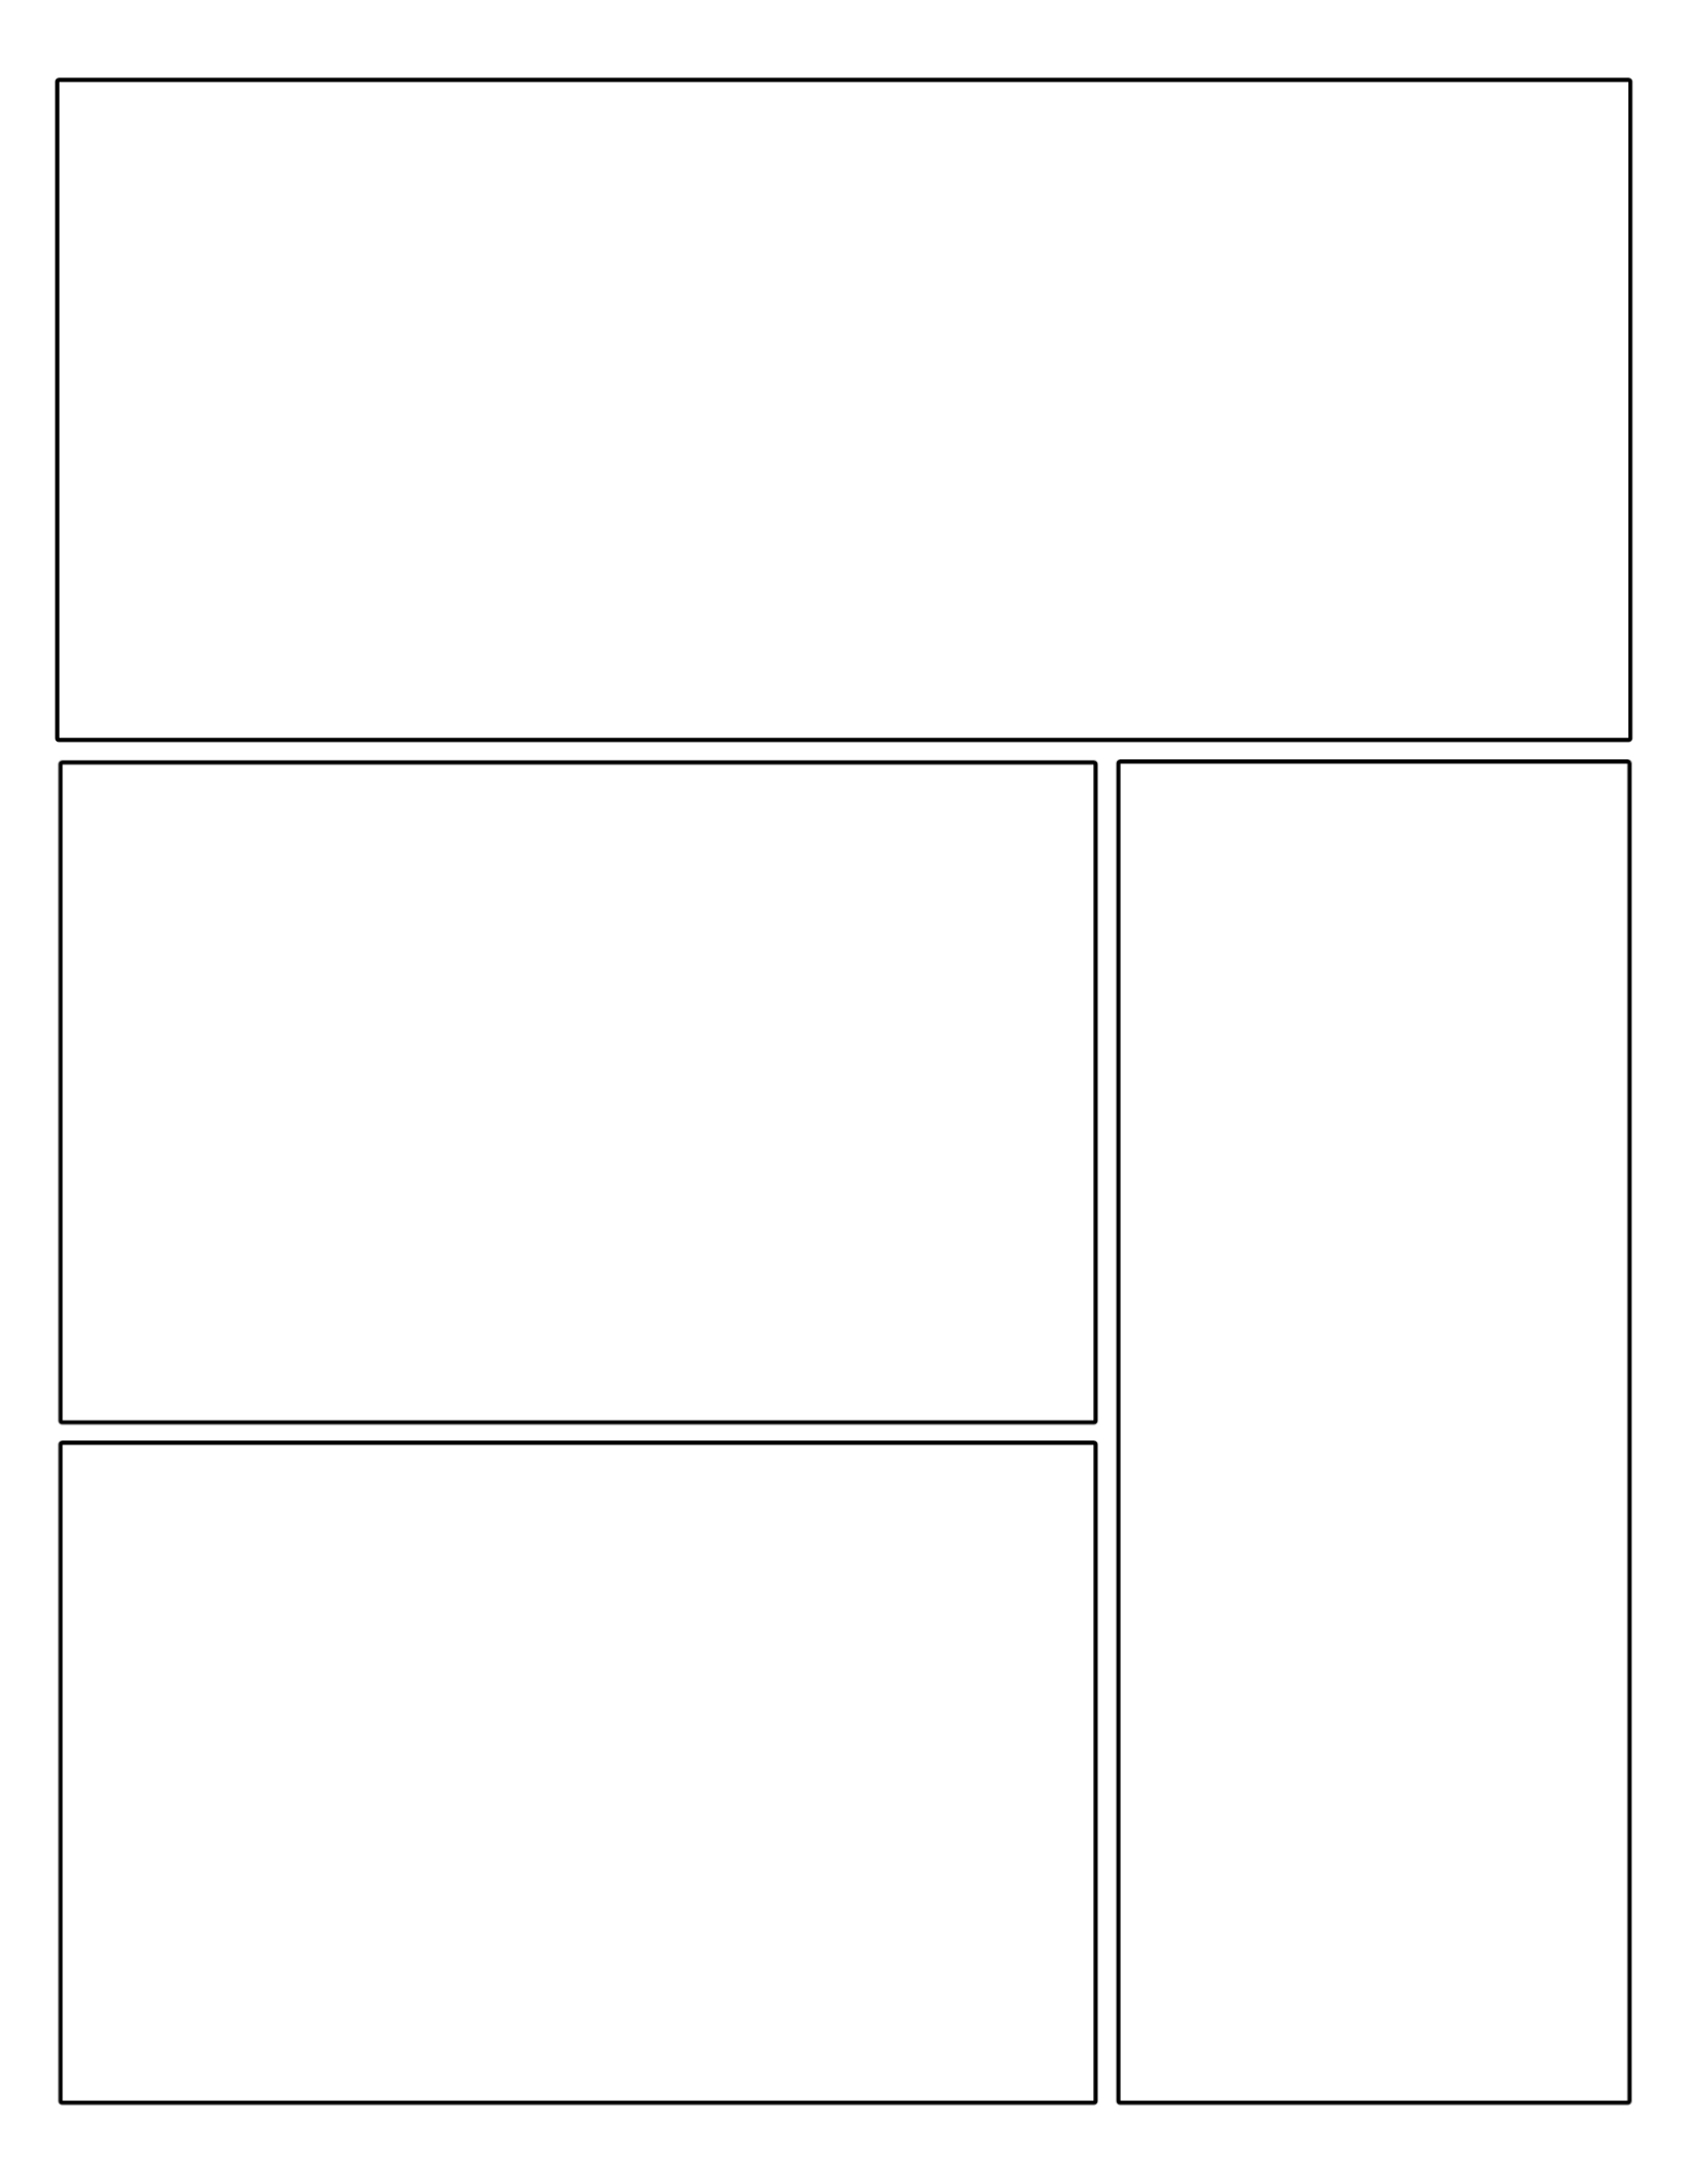 Free Printable Comic Strip Template Pages - Paper Trail Design Pertaining To Printable Blank Comic Strip Template For Kids